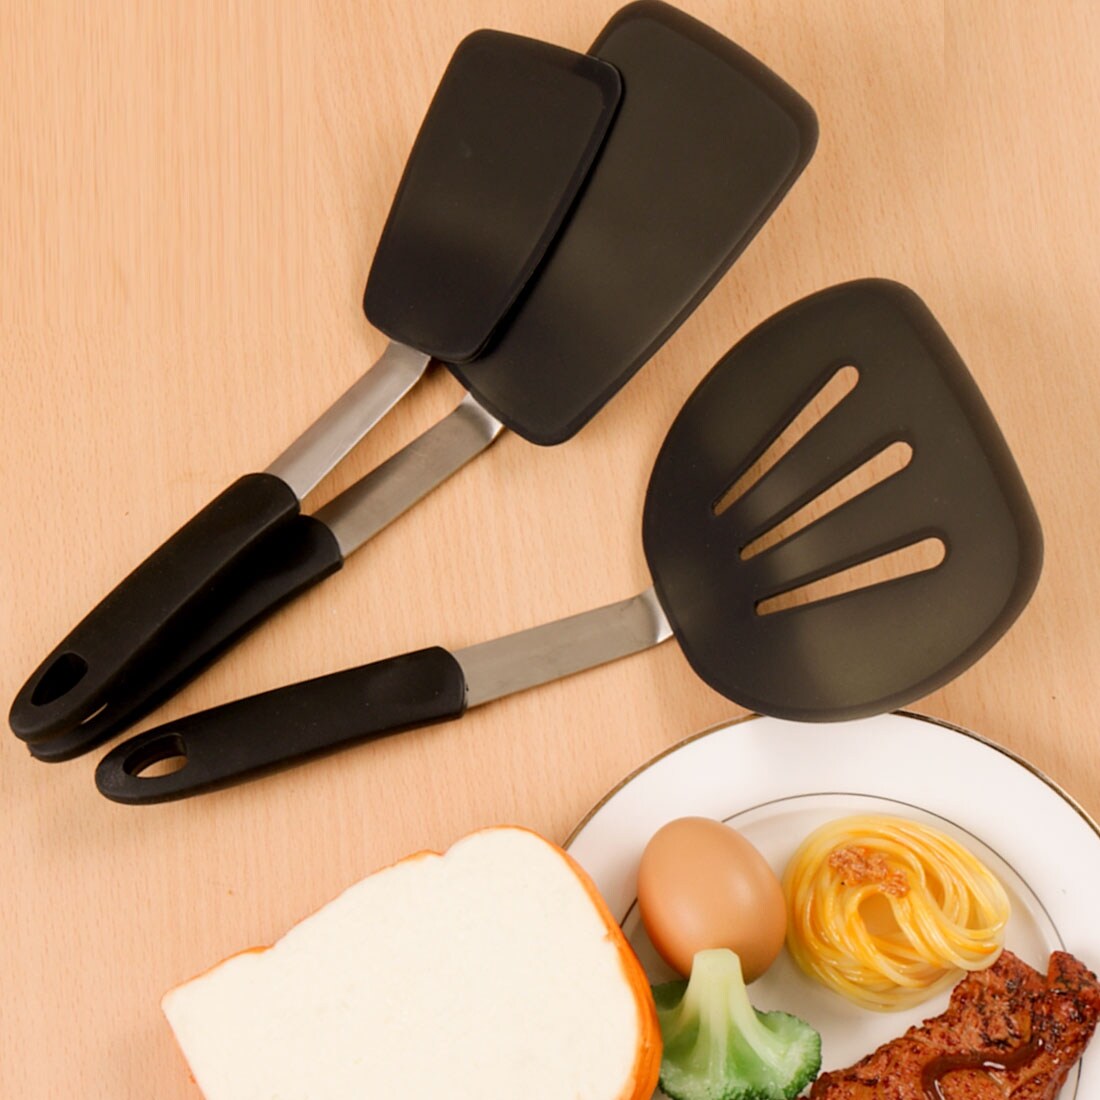 https://ak1.ostkcdn.com/images/products/is/images/direct/d597bf2c5402a505f72a92995cf7556af77318a2/3pcs-Silicone-Spatula-Set-Heat-Resistant-Non-Stick-for-Kitchen-Baking.jpg